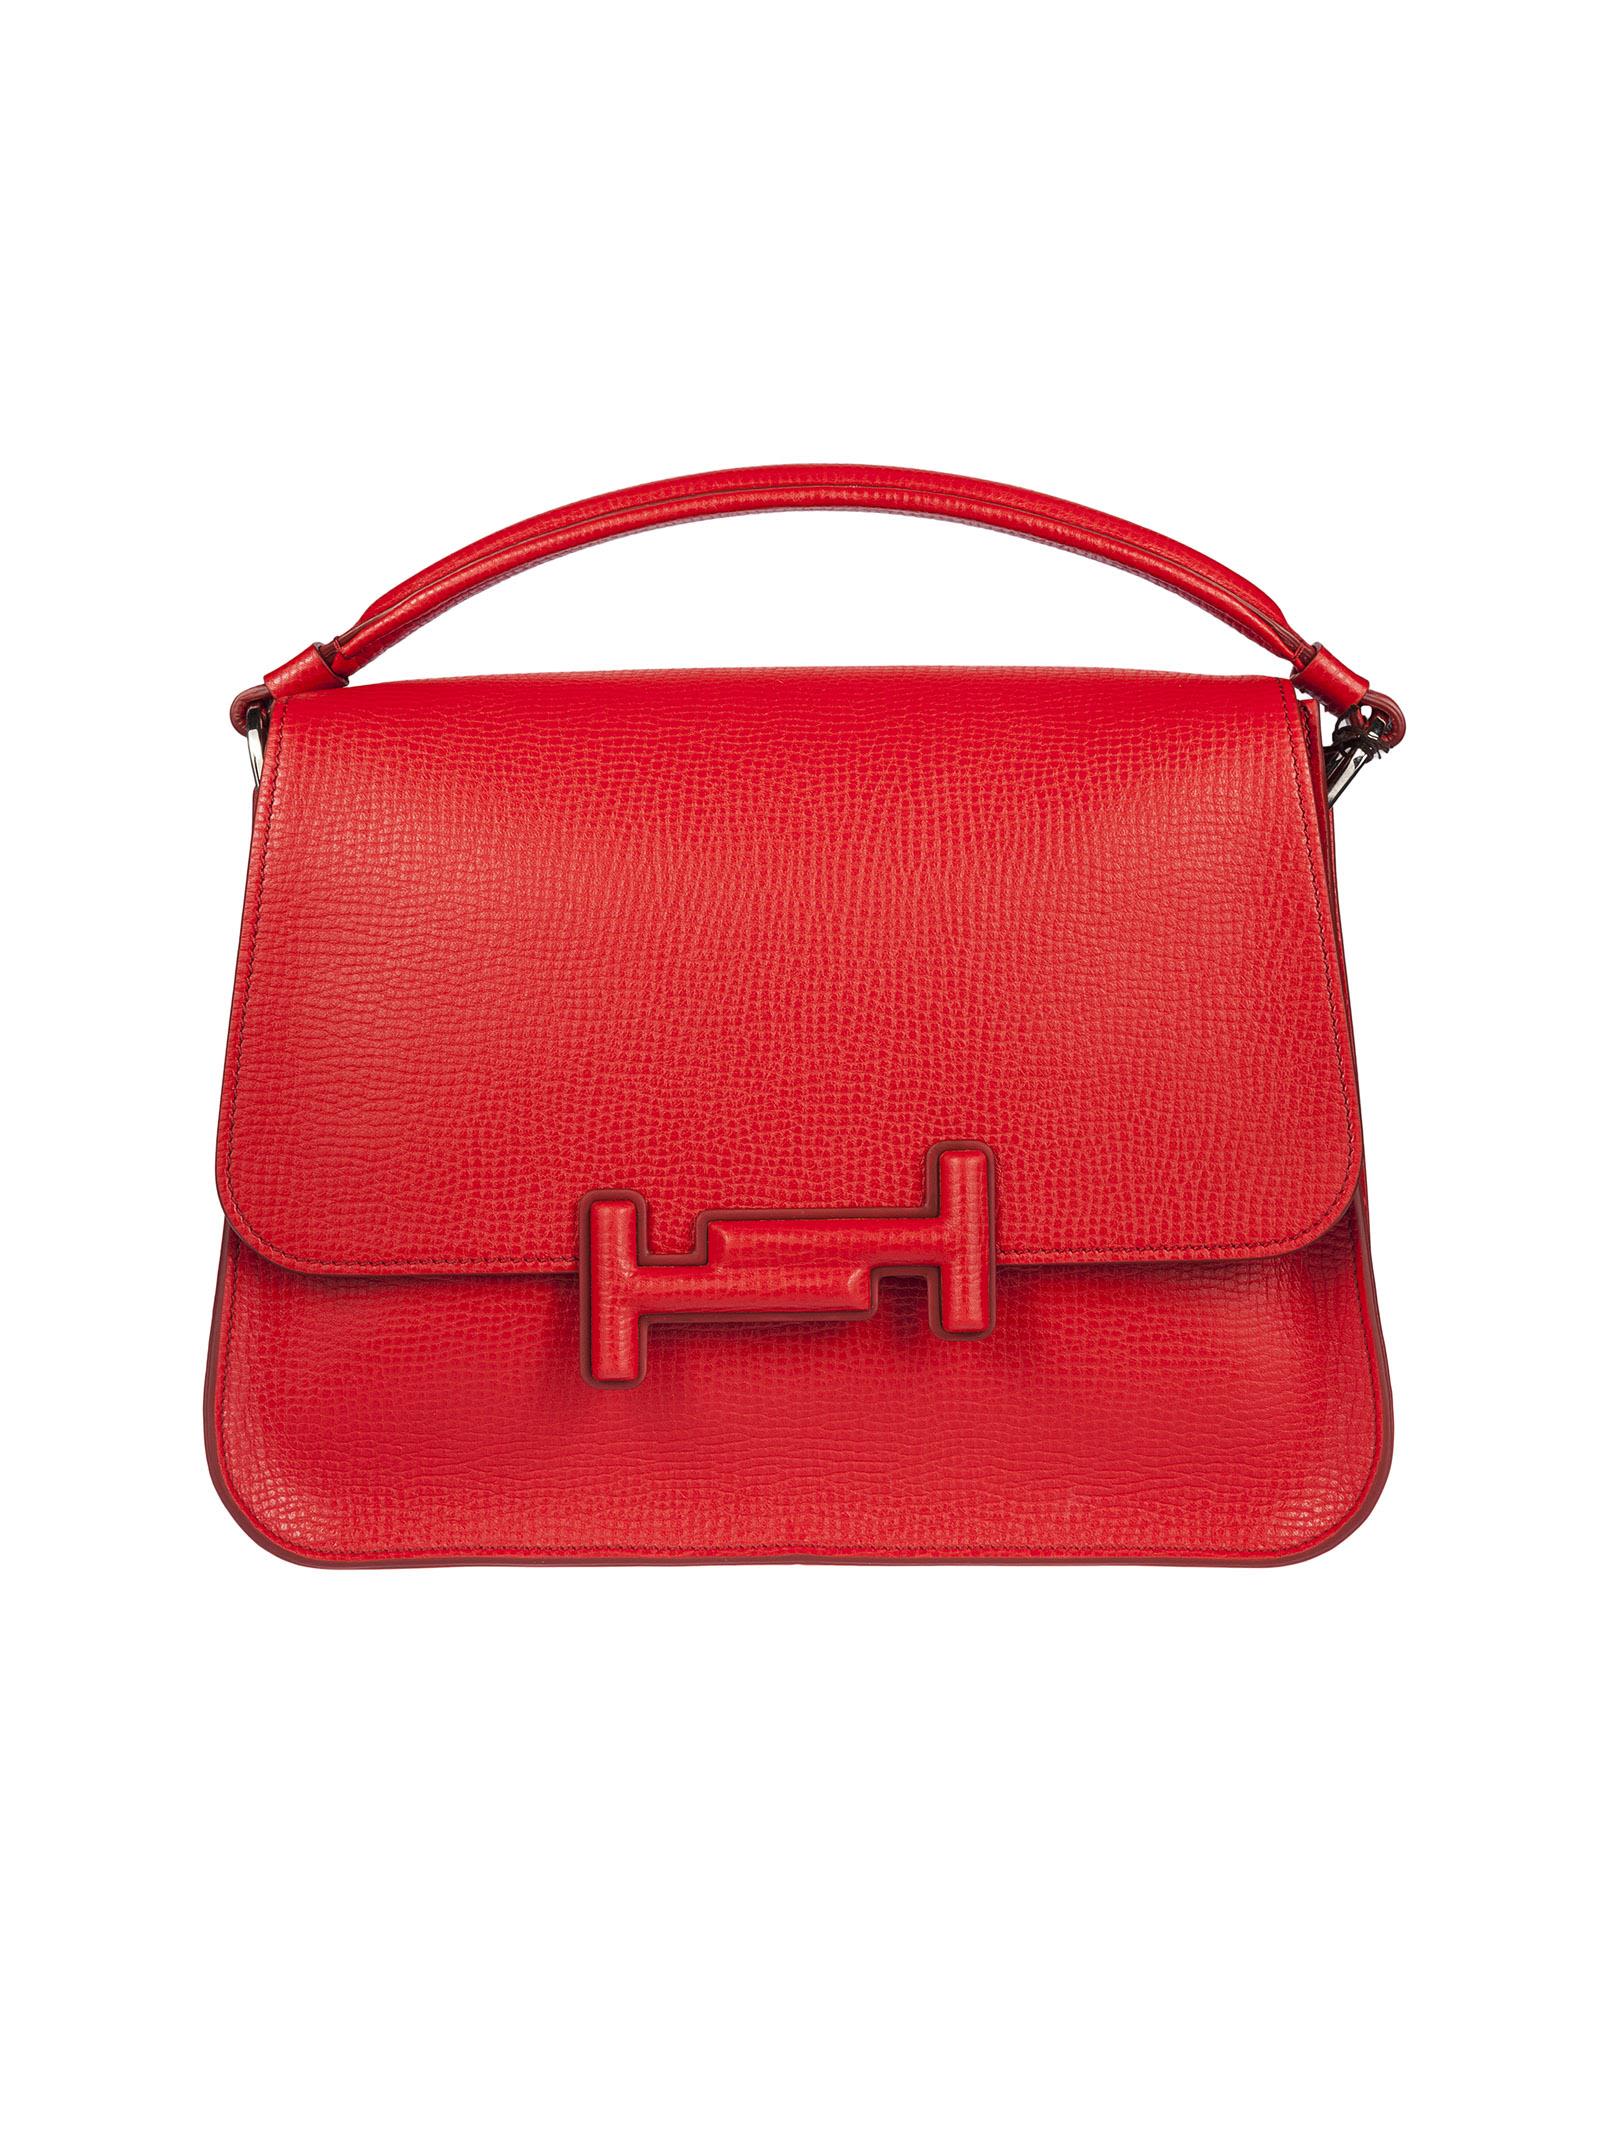 TOD'S DOUBLE T SHOULDER BAG, RED | ModeSens